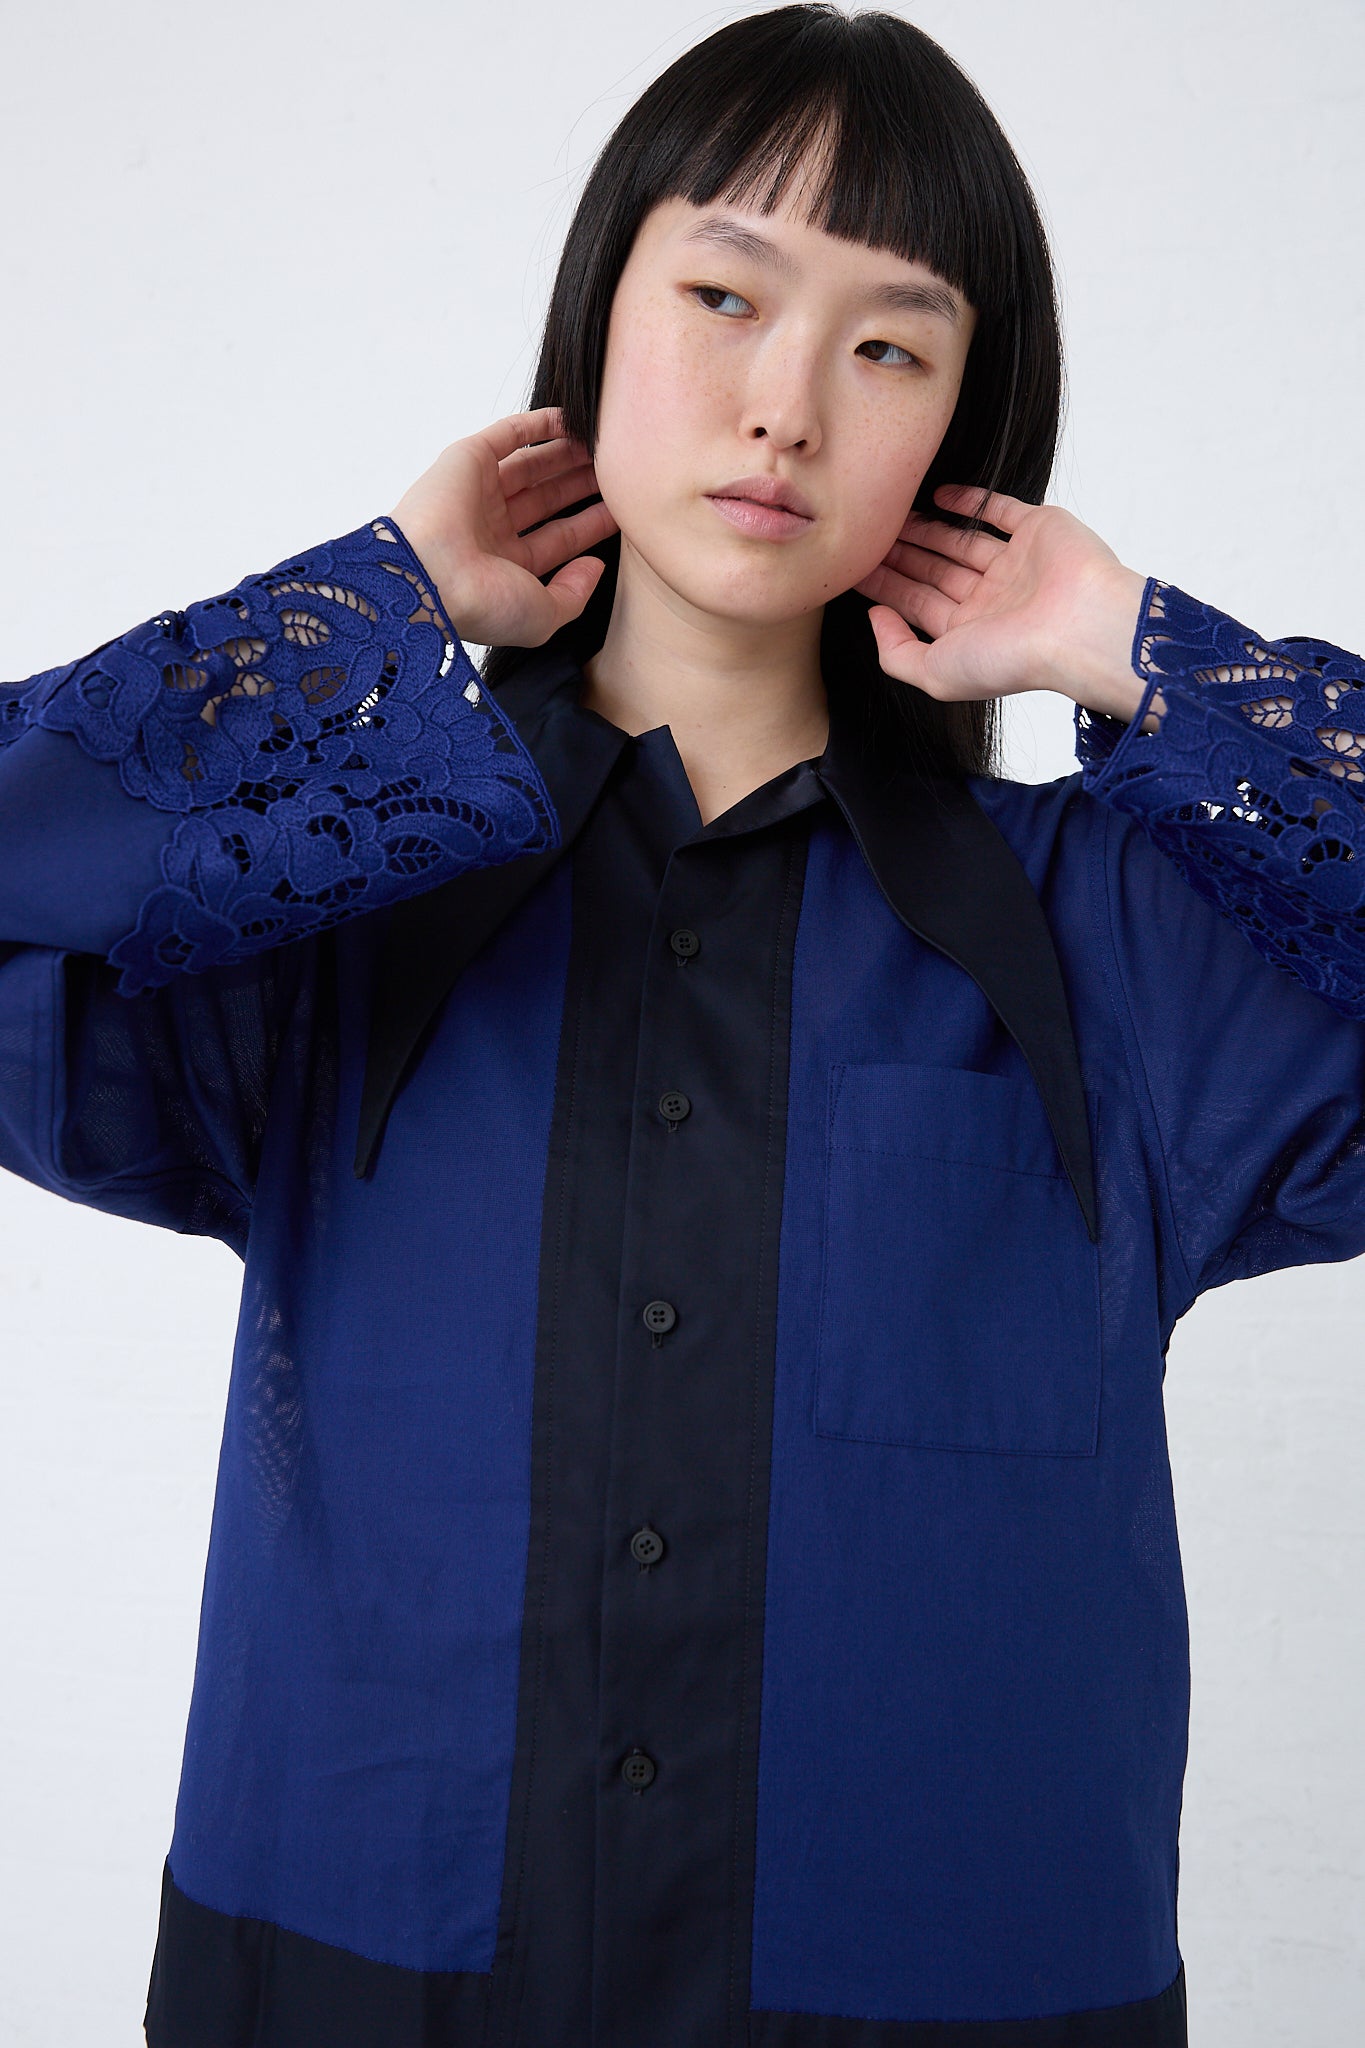 Woman in a TOGA ARCHIVES Mesh Lace Shirt in Blue with relaxed fit, touching her ears, against a white background.